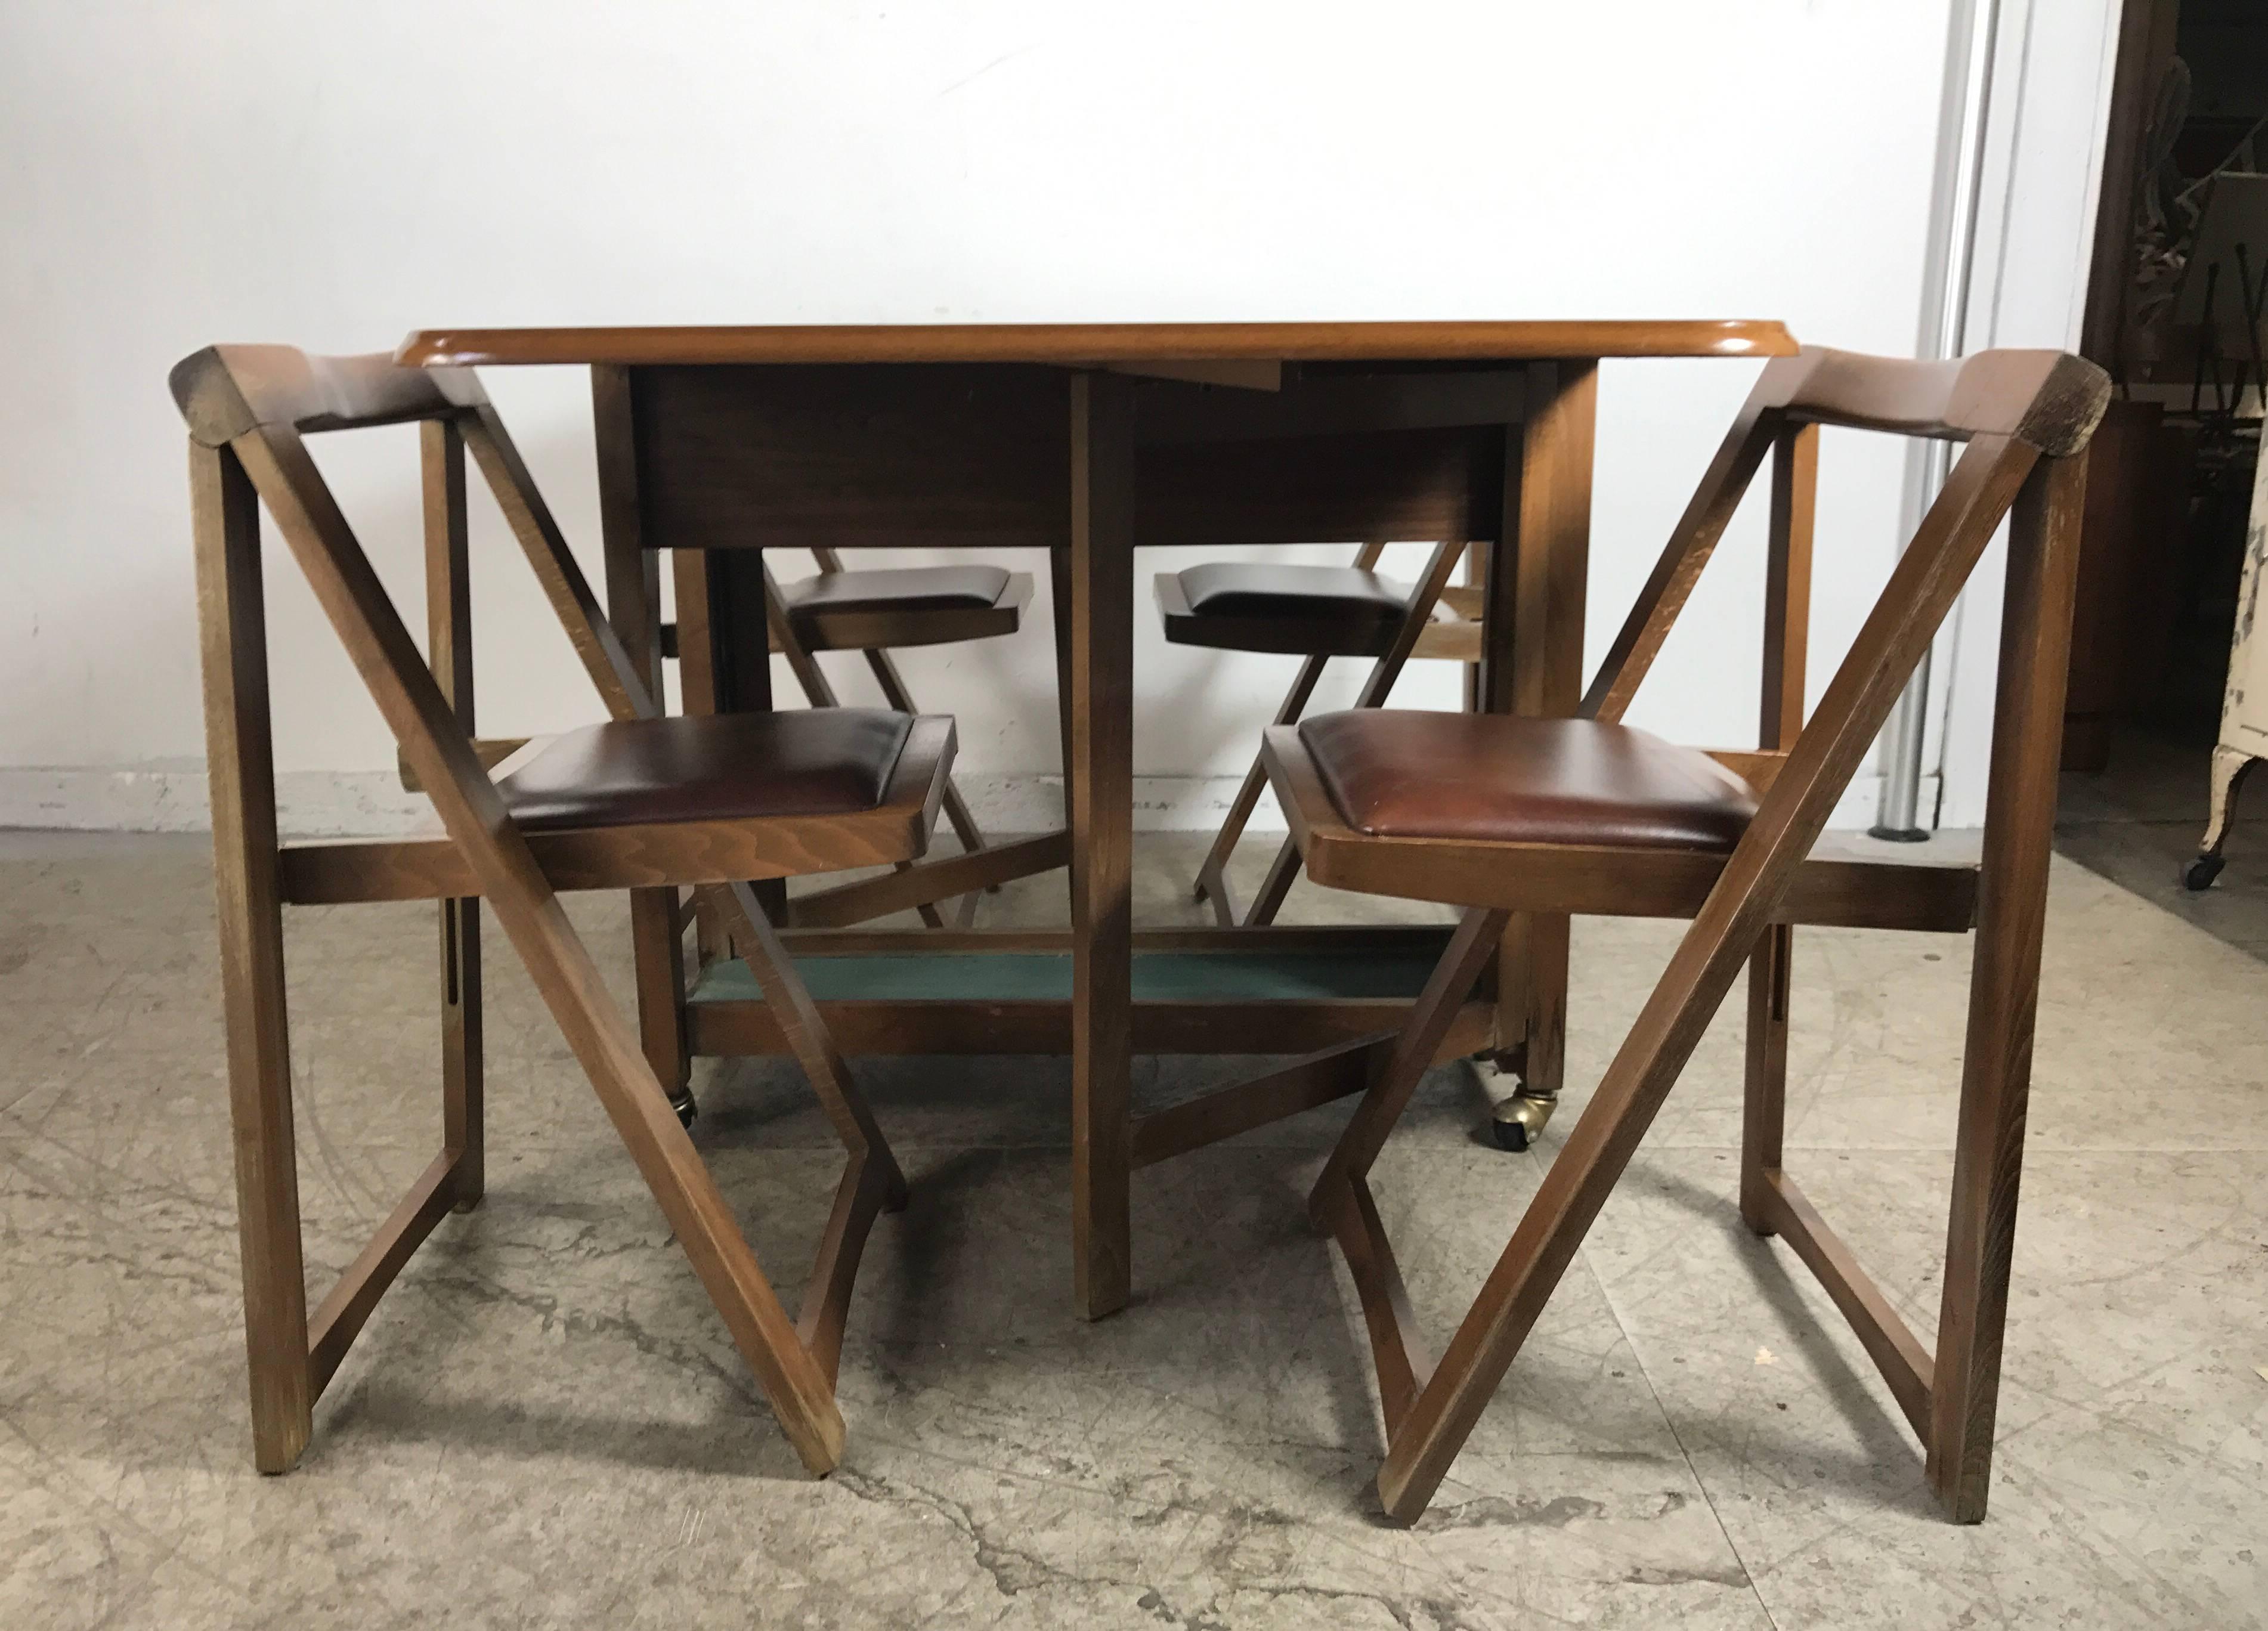 Modernist Suitcase Dining Table, Fold Down, Compact Self Stored Chairs 1